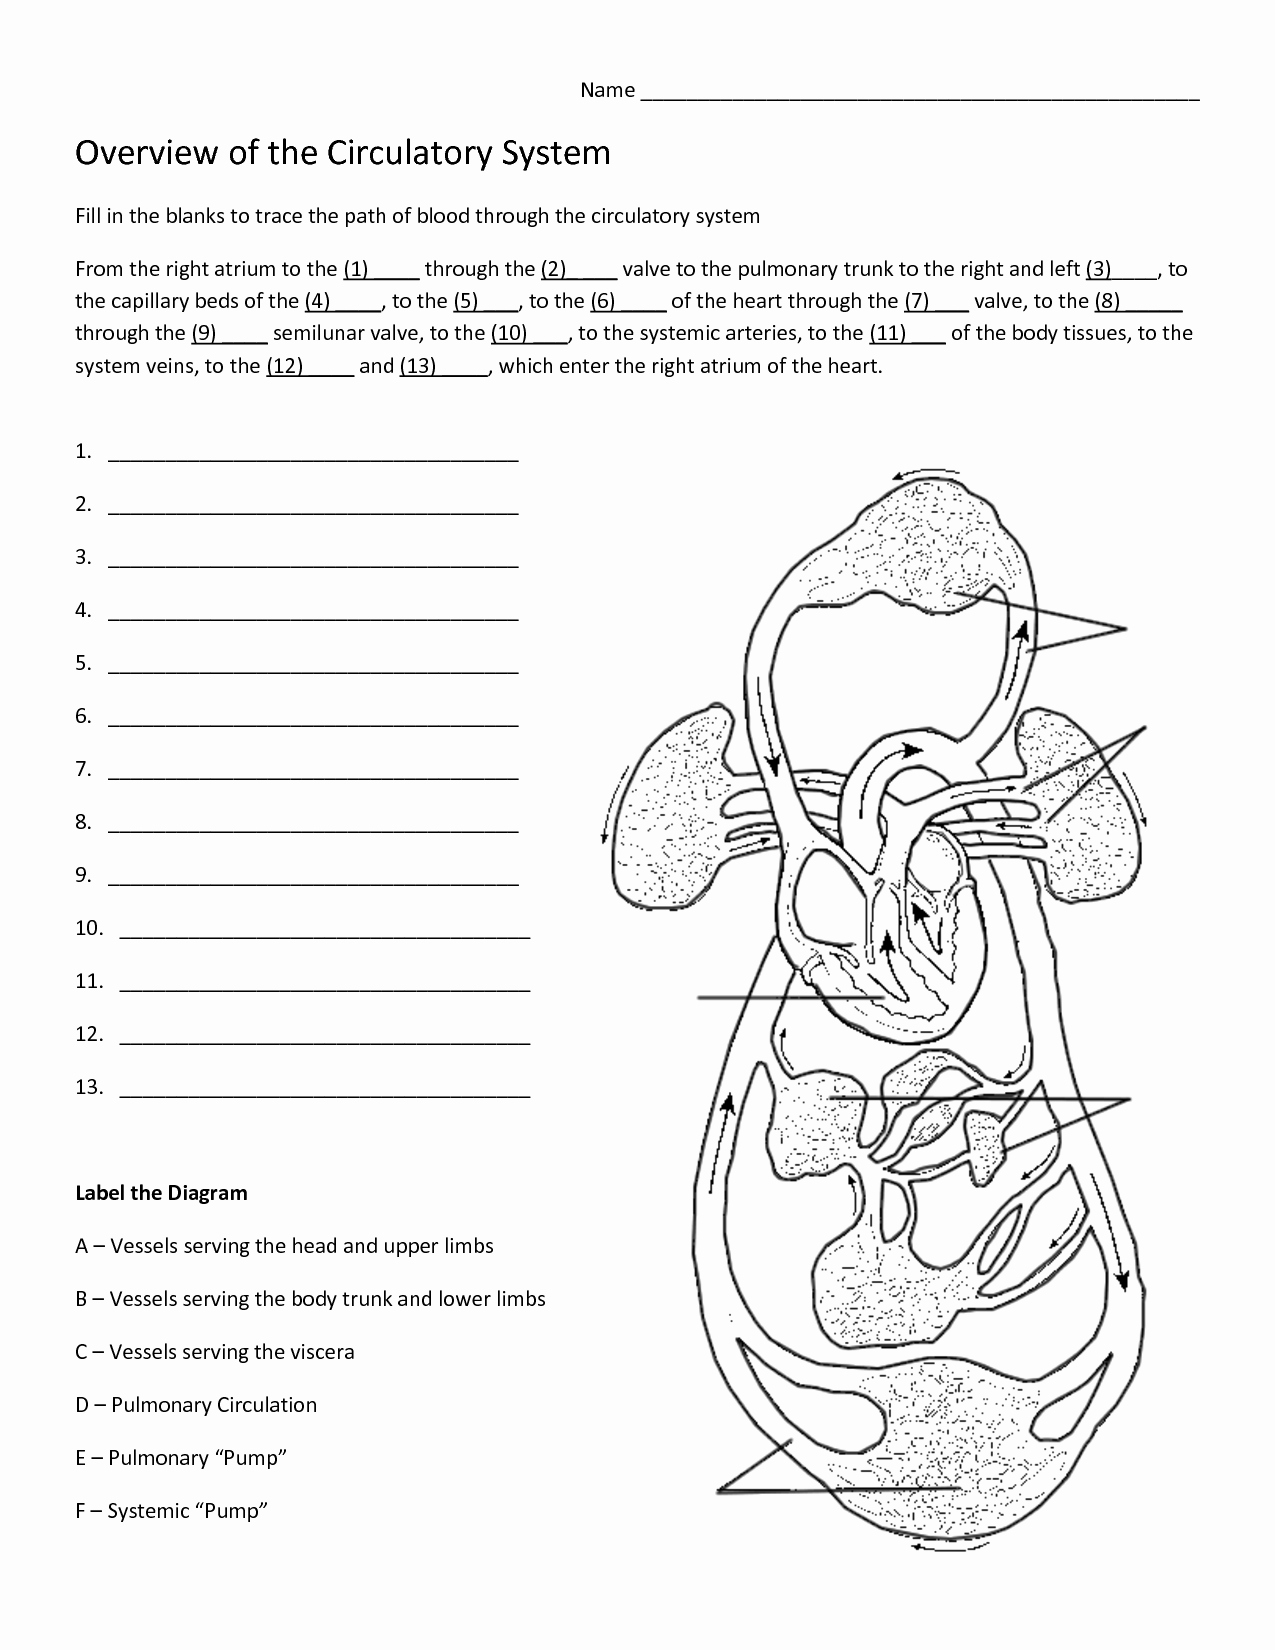 The Cardiovascular System Worksheet Luxury the Circulatory System Worksheet the Best Worksheets Image